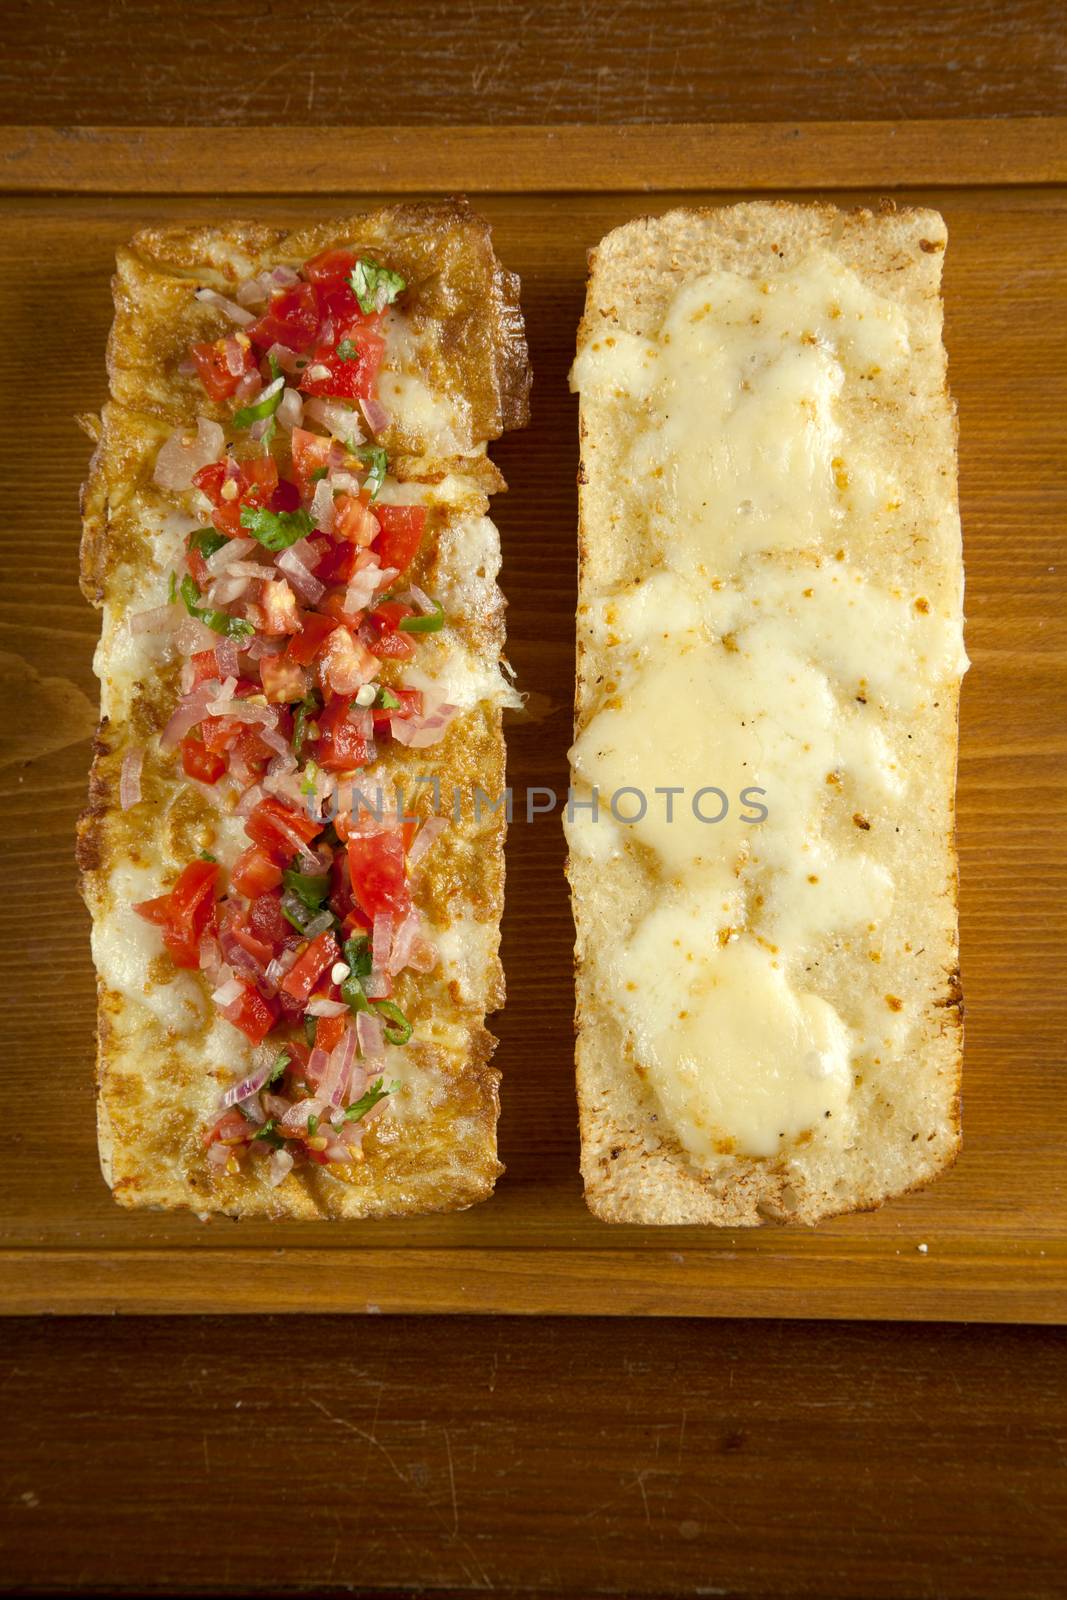 Toasted open faced salsa and egg sandwich with melted mozzarella by haiderazim